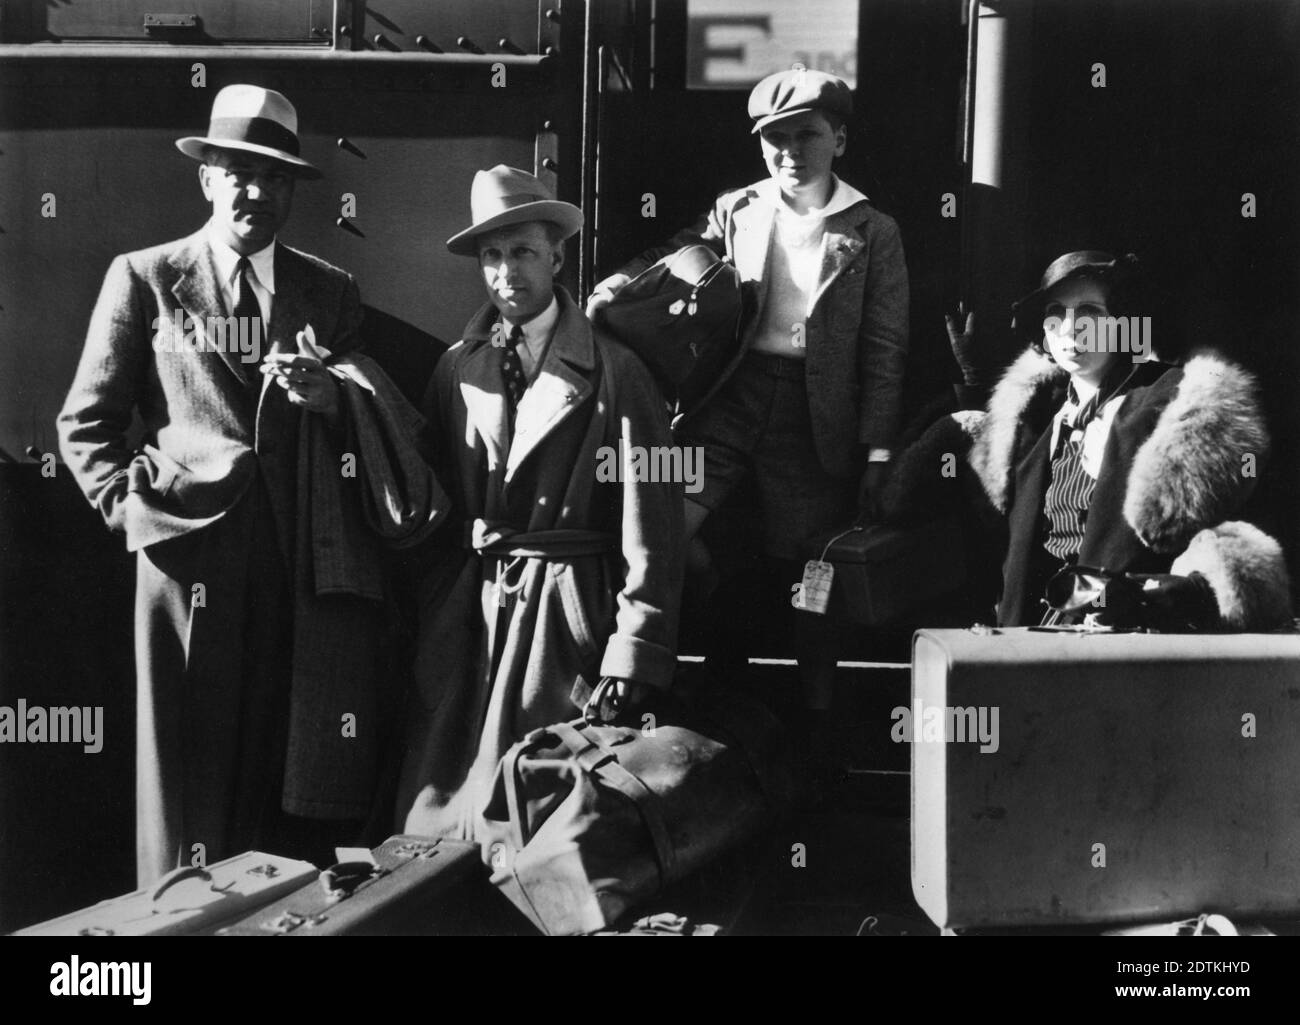 Director VICTOR FLEMING OTTO KRUGER JACKIE COOPER and his Mother arriving at San Francisco for location filming in Oakland California for TREASURE ISLAND 1934 director VICTOR FLEMING screenplay John Lee Mahin novel Robert Louis Stevenson Metro Goldwyn Mayer Stock Photo